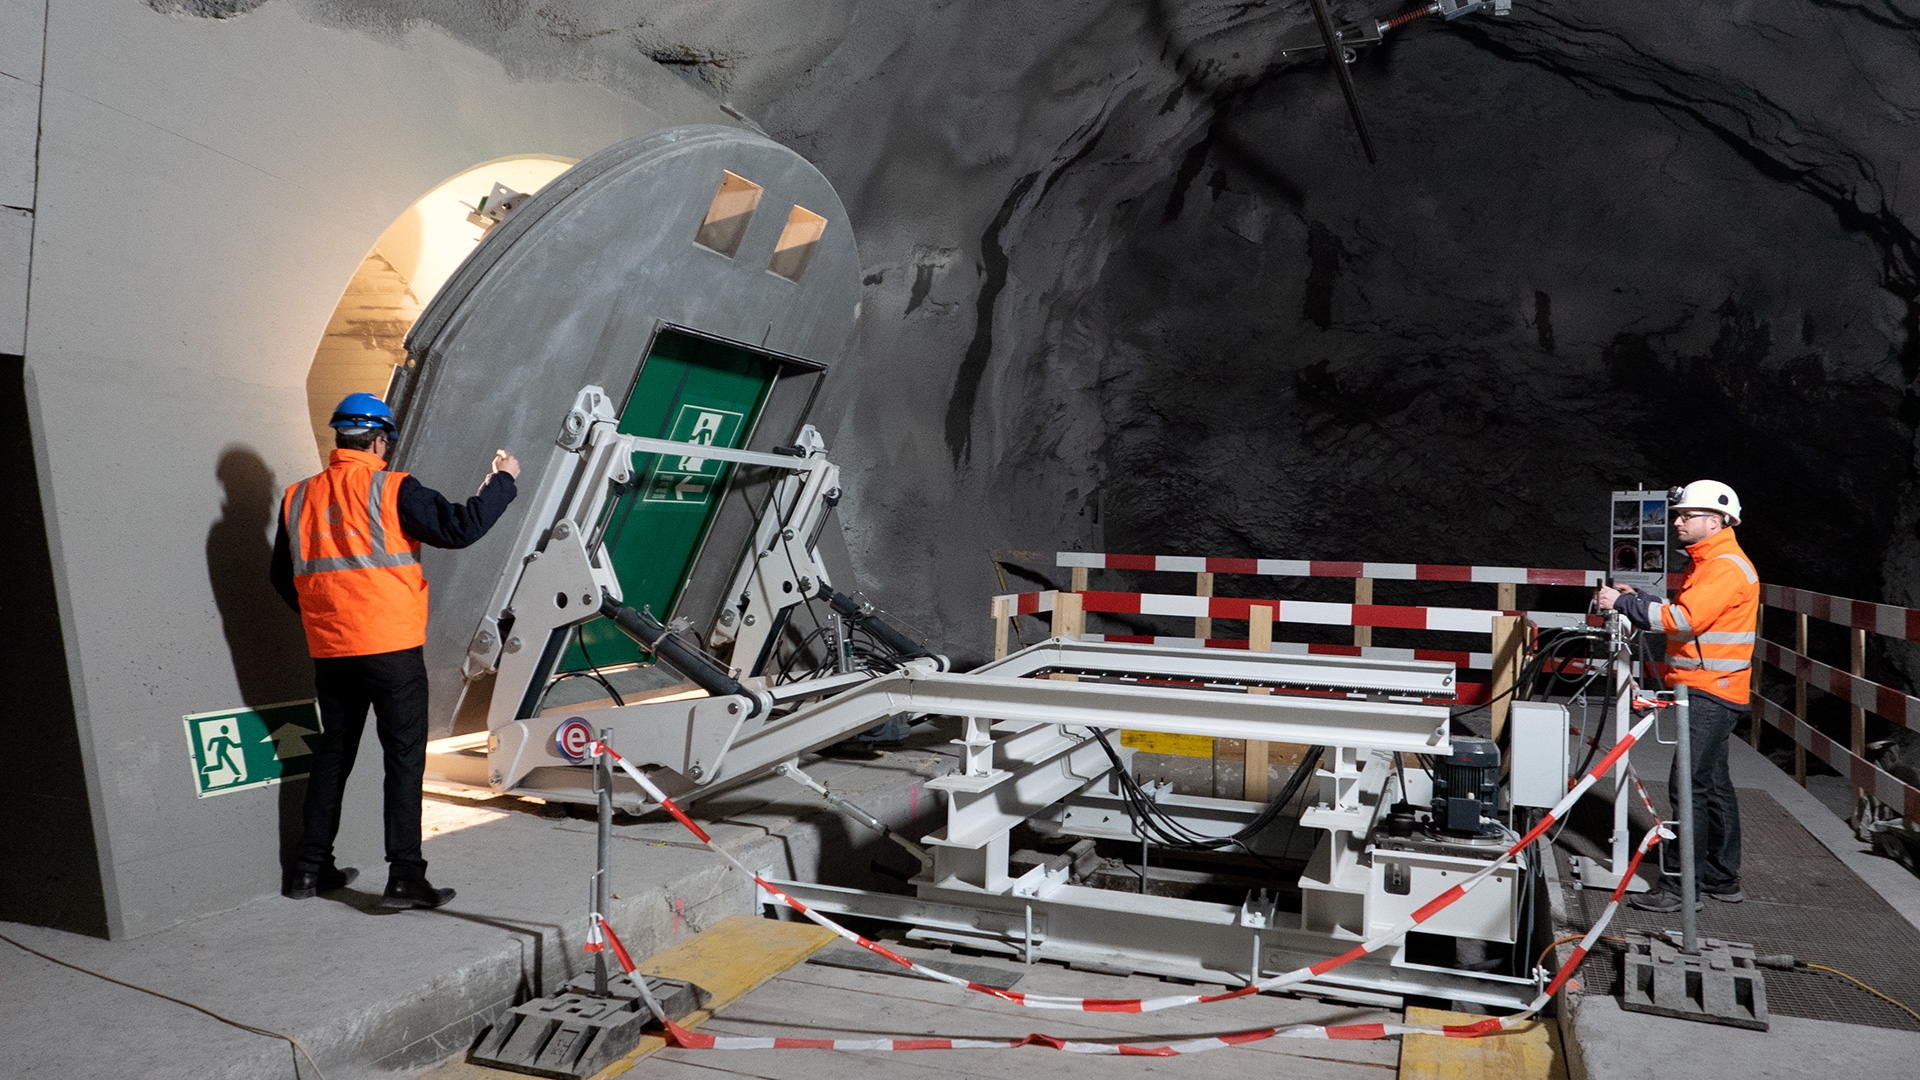 Cooperating to improve tunnel operations and safety